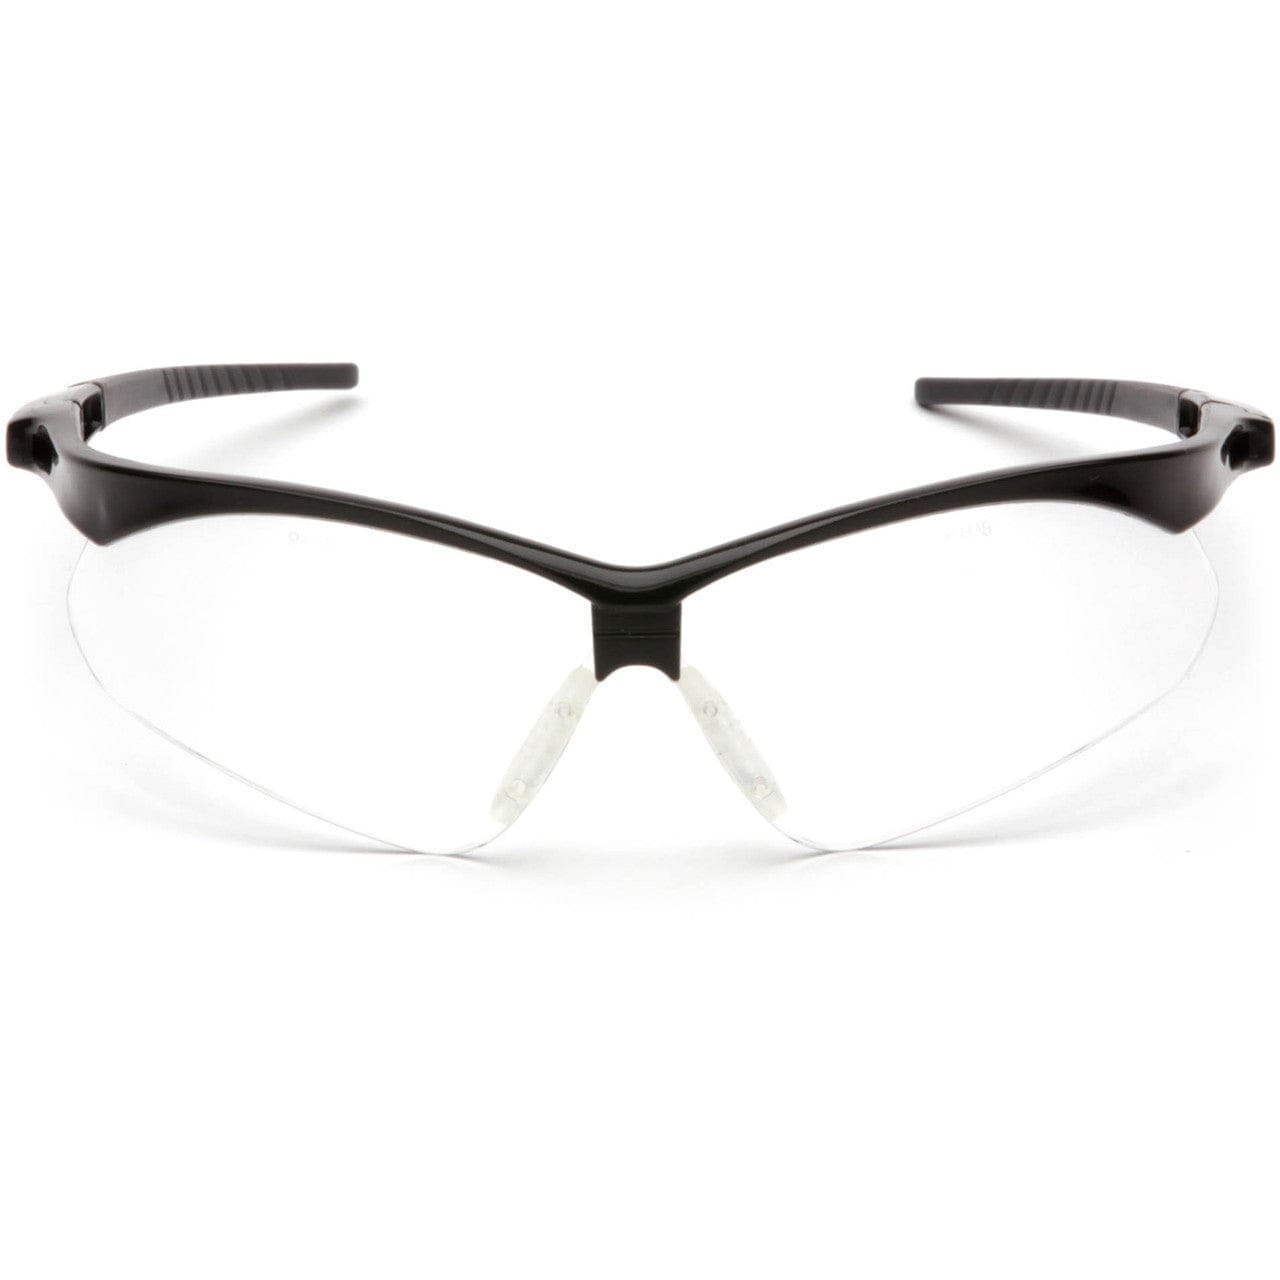 Pyramex PMXtreme Safety Glasses with Black Frame and Clear Anti-Fog Lens Front